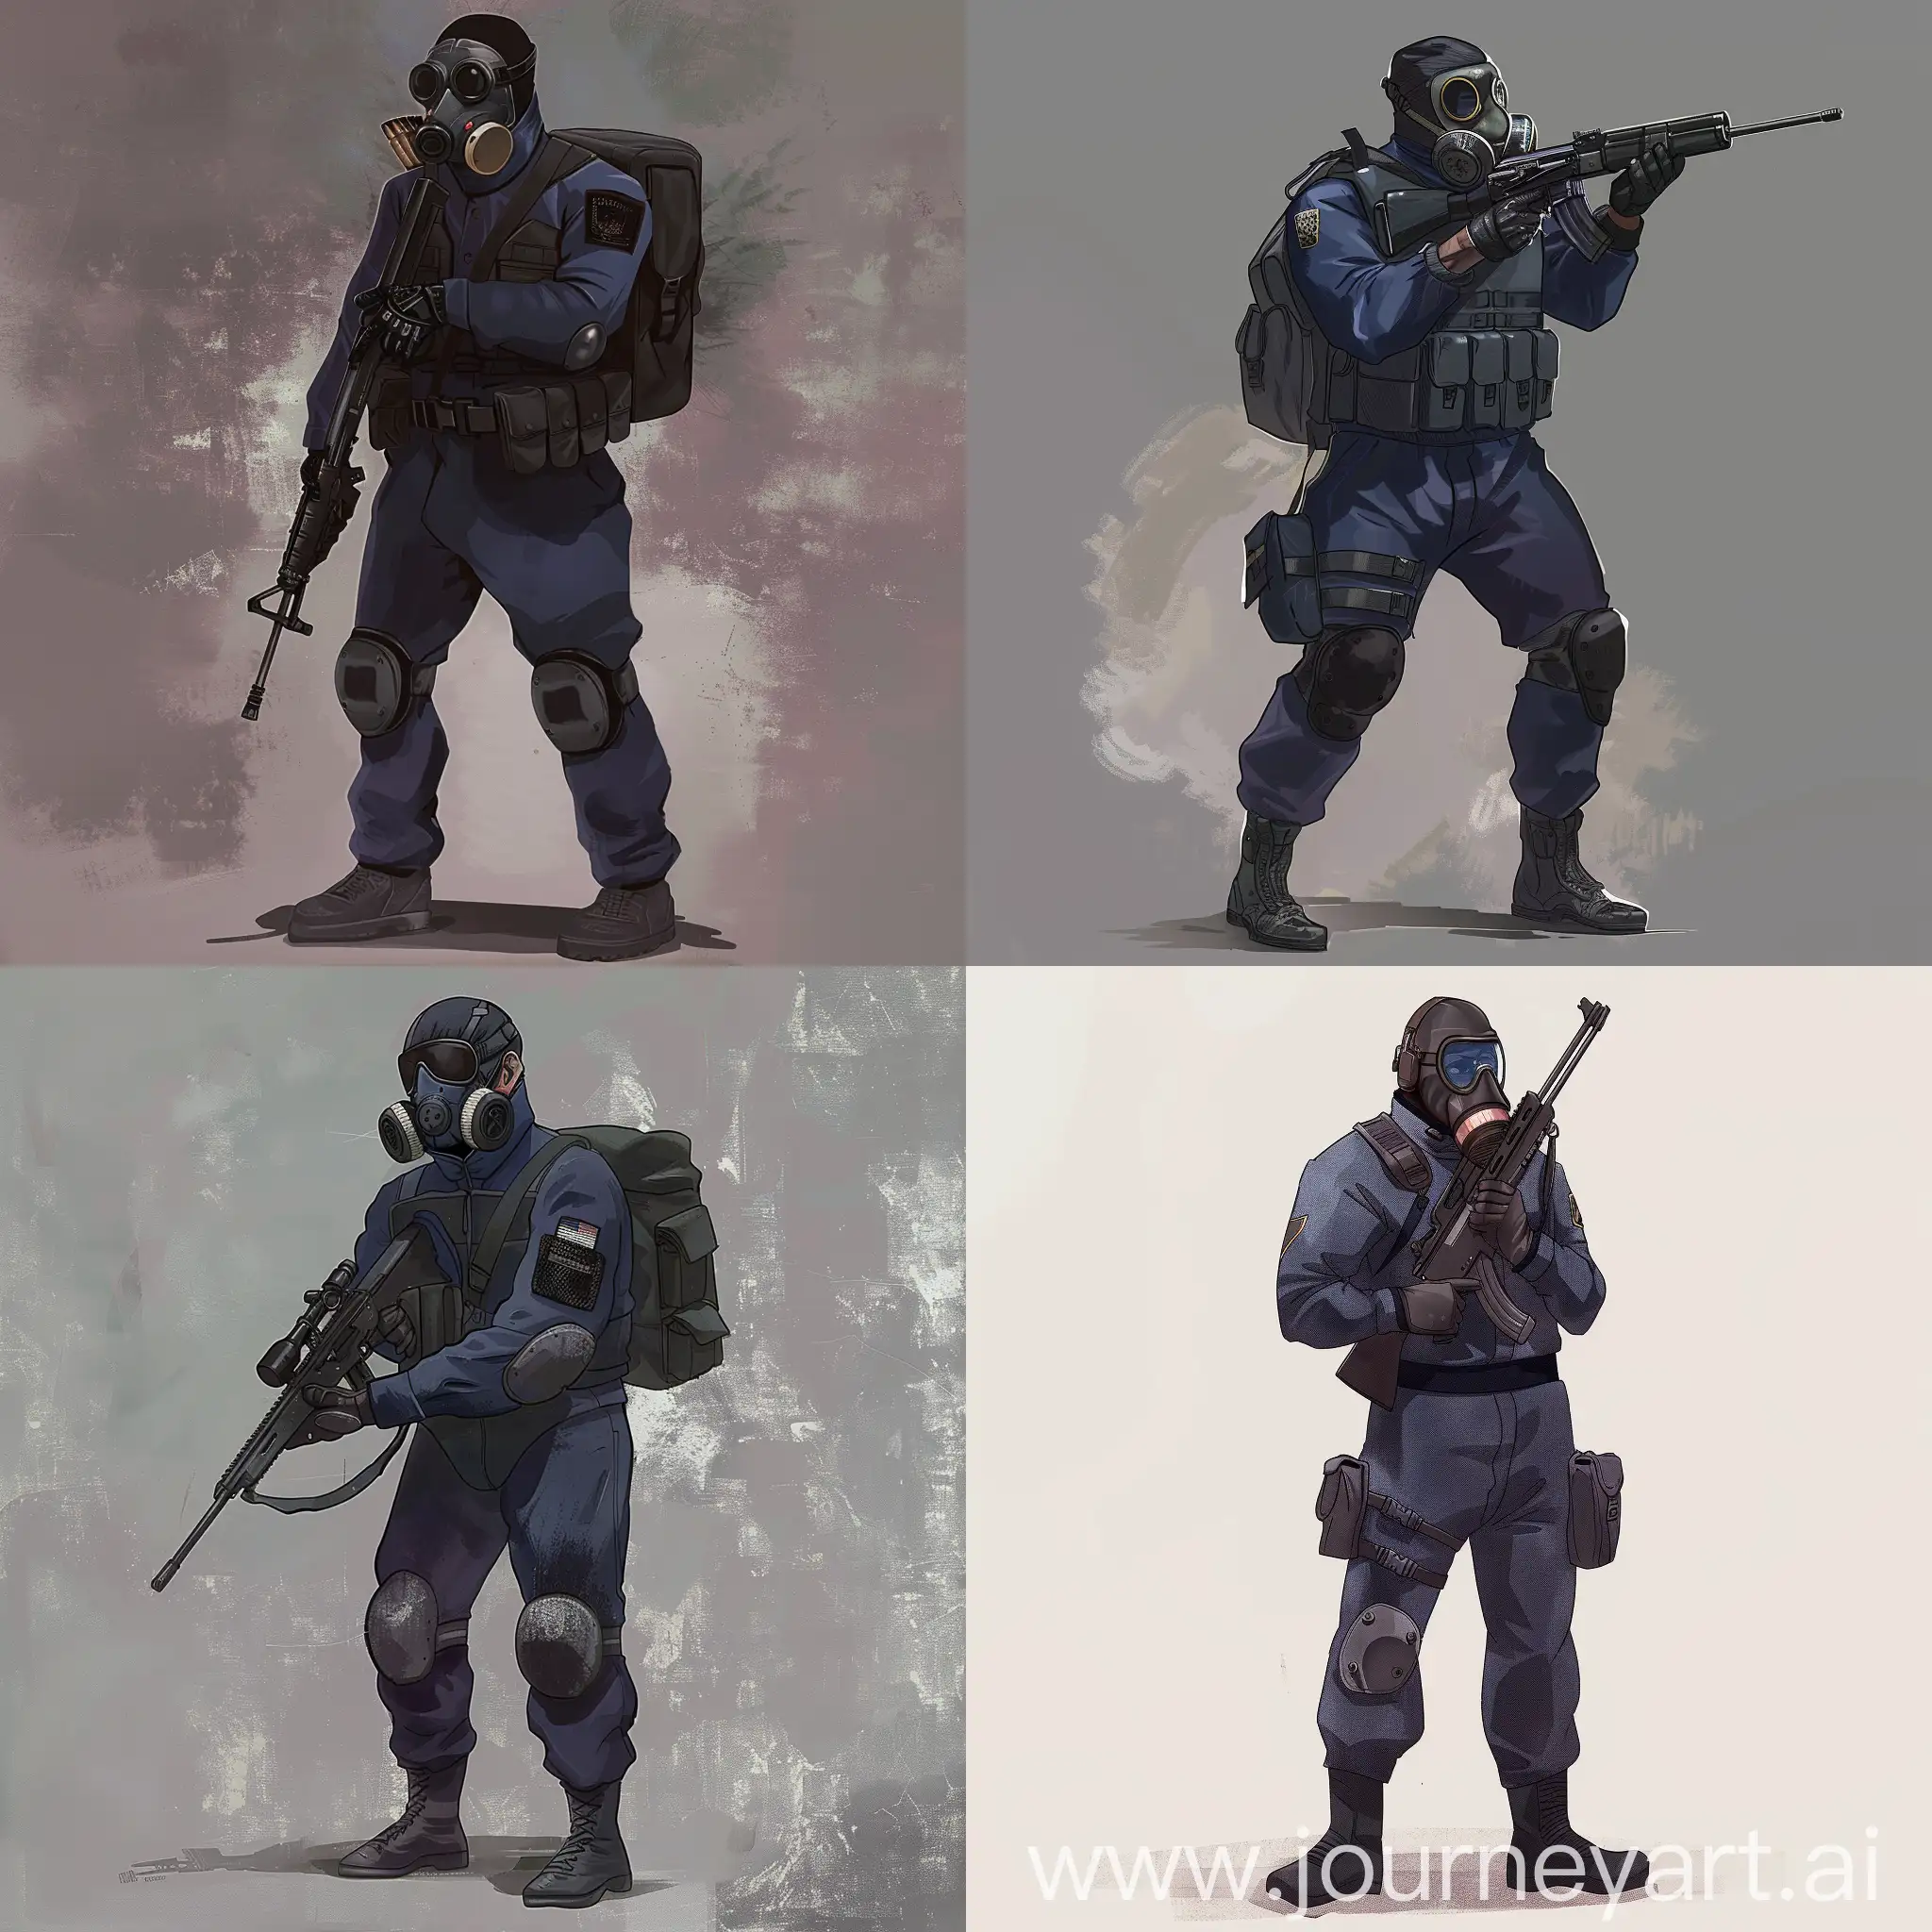 Mercenary-in-Dark-Purple-Military-Jumpsuit-with-Gas-Mask-and-Sniper-Rifle